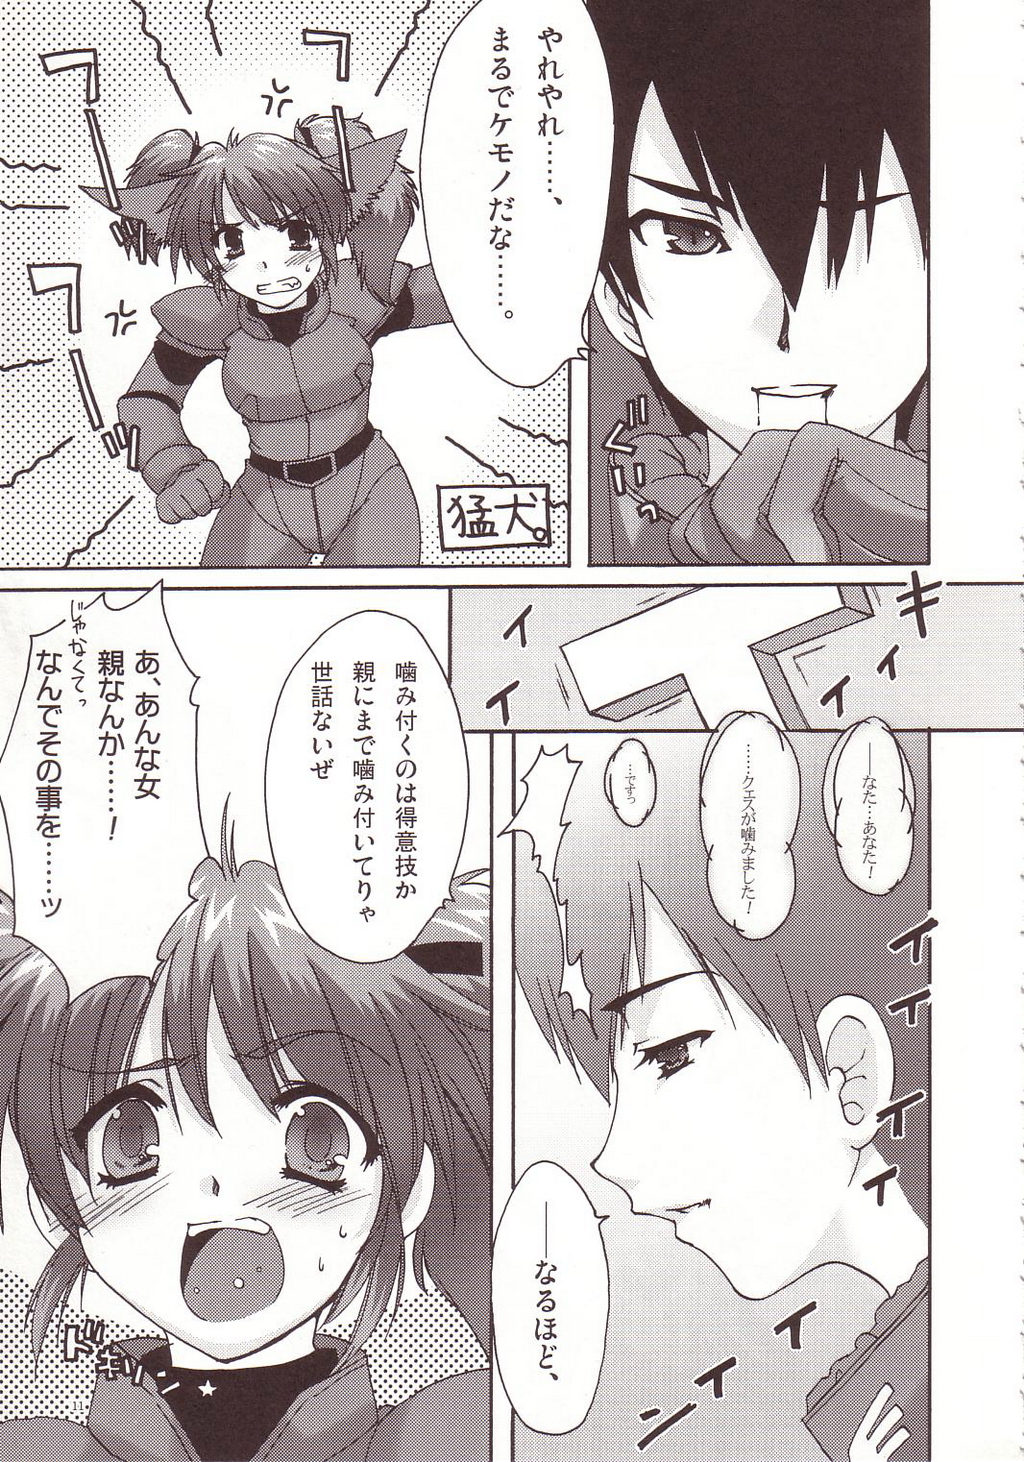 [AKABEi SOFT (Alpha)] Aishitai I WANT TO LOVE (Mobile Suit Gundam Char's Counterattack) page 10 full